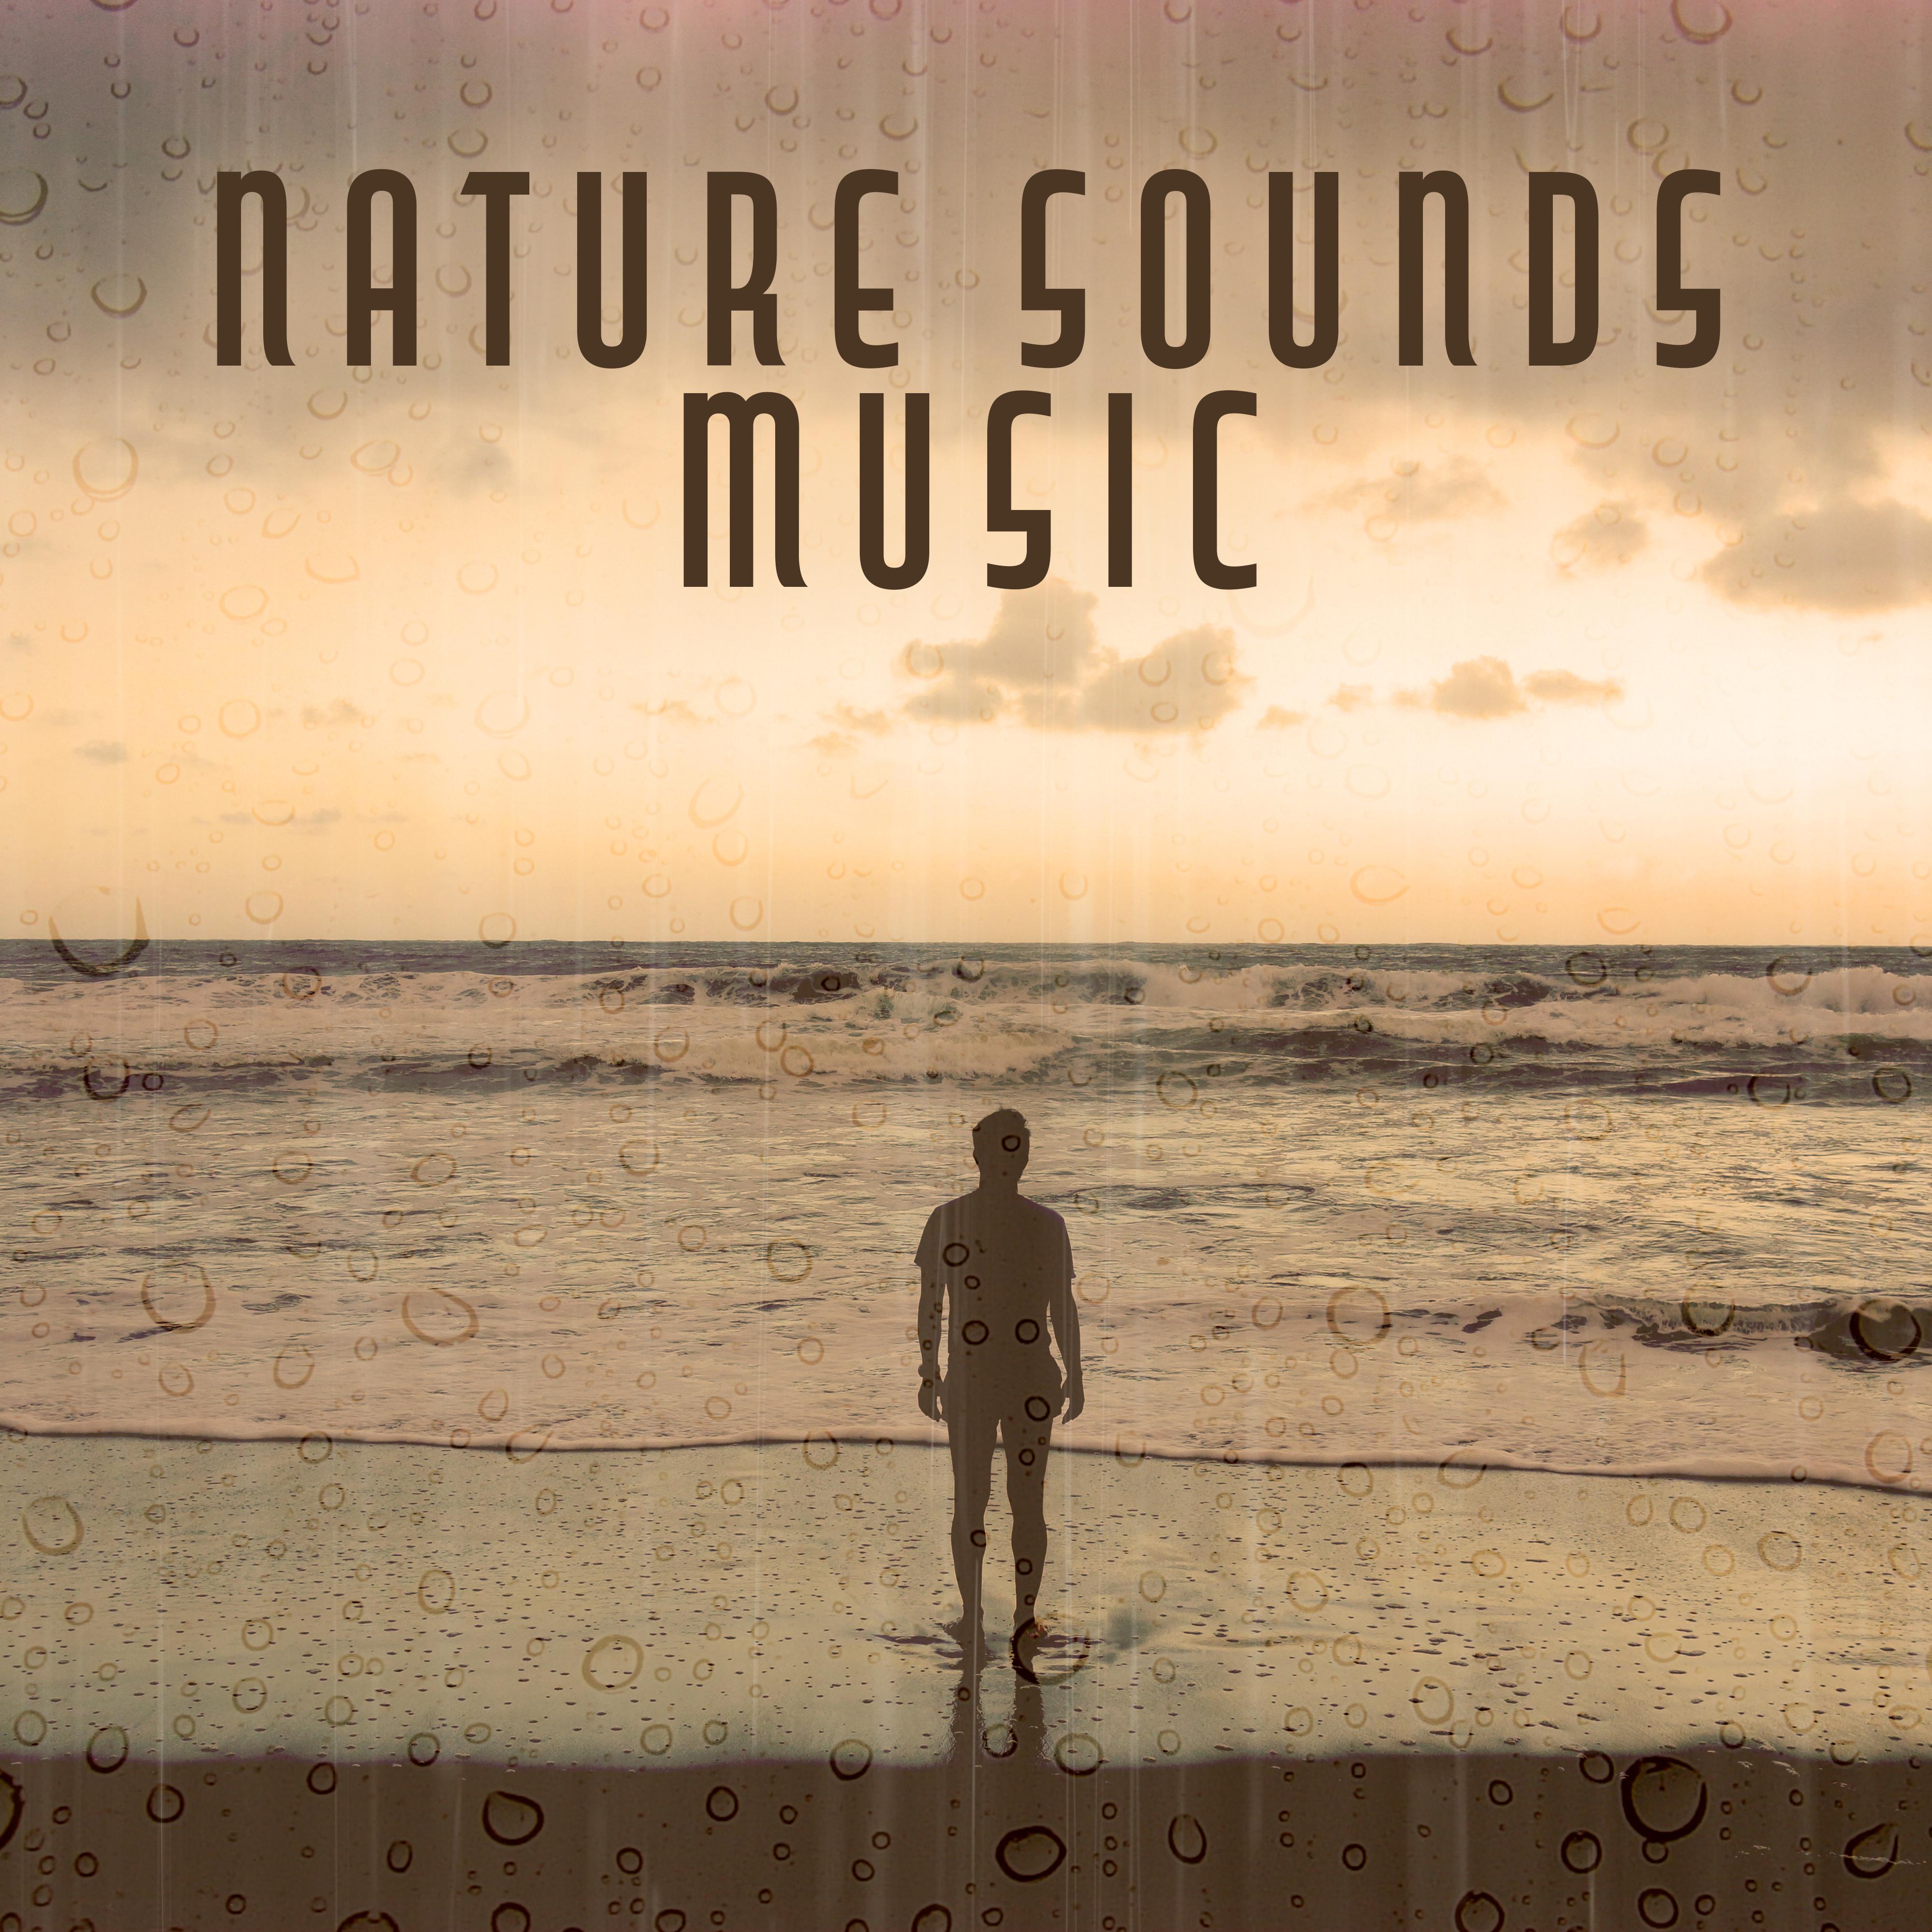 Nature Sounds Music  Relaxing Waves of Calmness, Stress Relief, Peaceful New Age